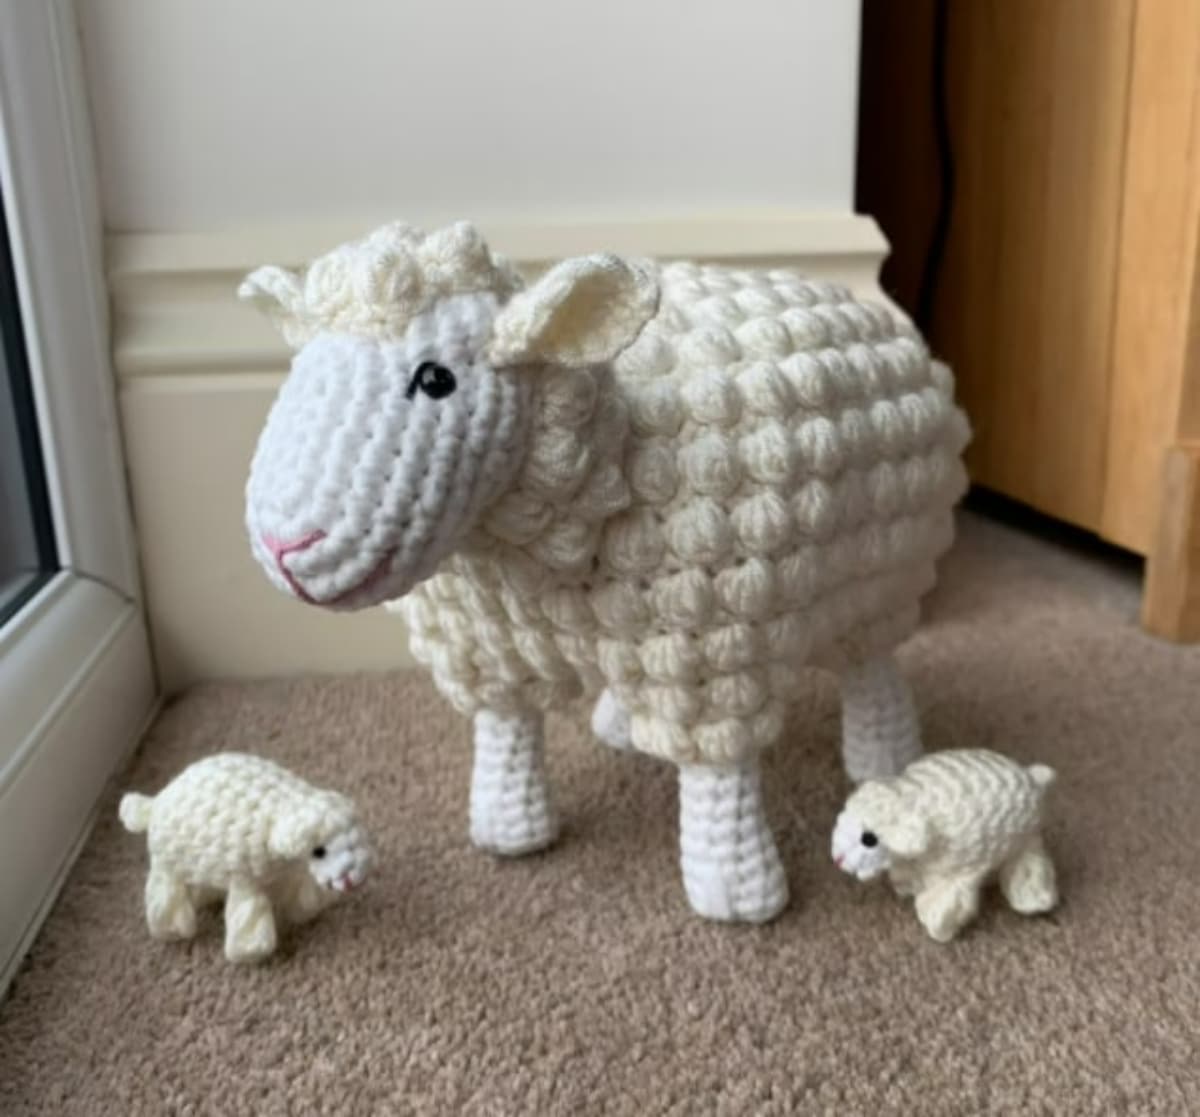 Large white crochet sheep with cream bobbles on its body standing next to two tiny lambs of the same design.